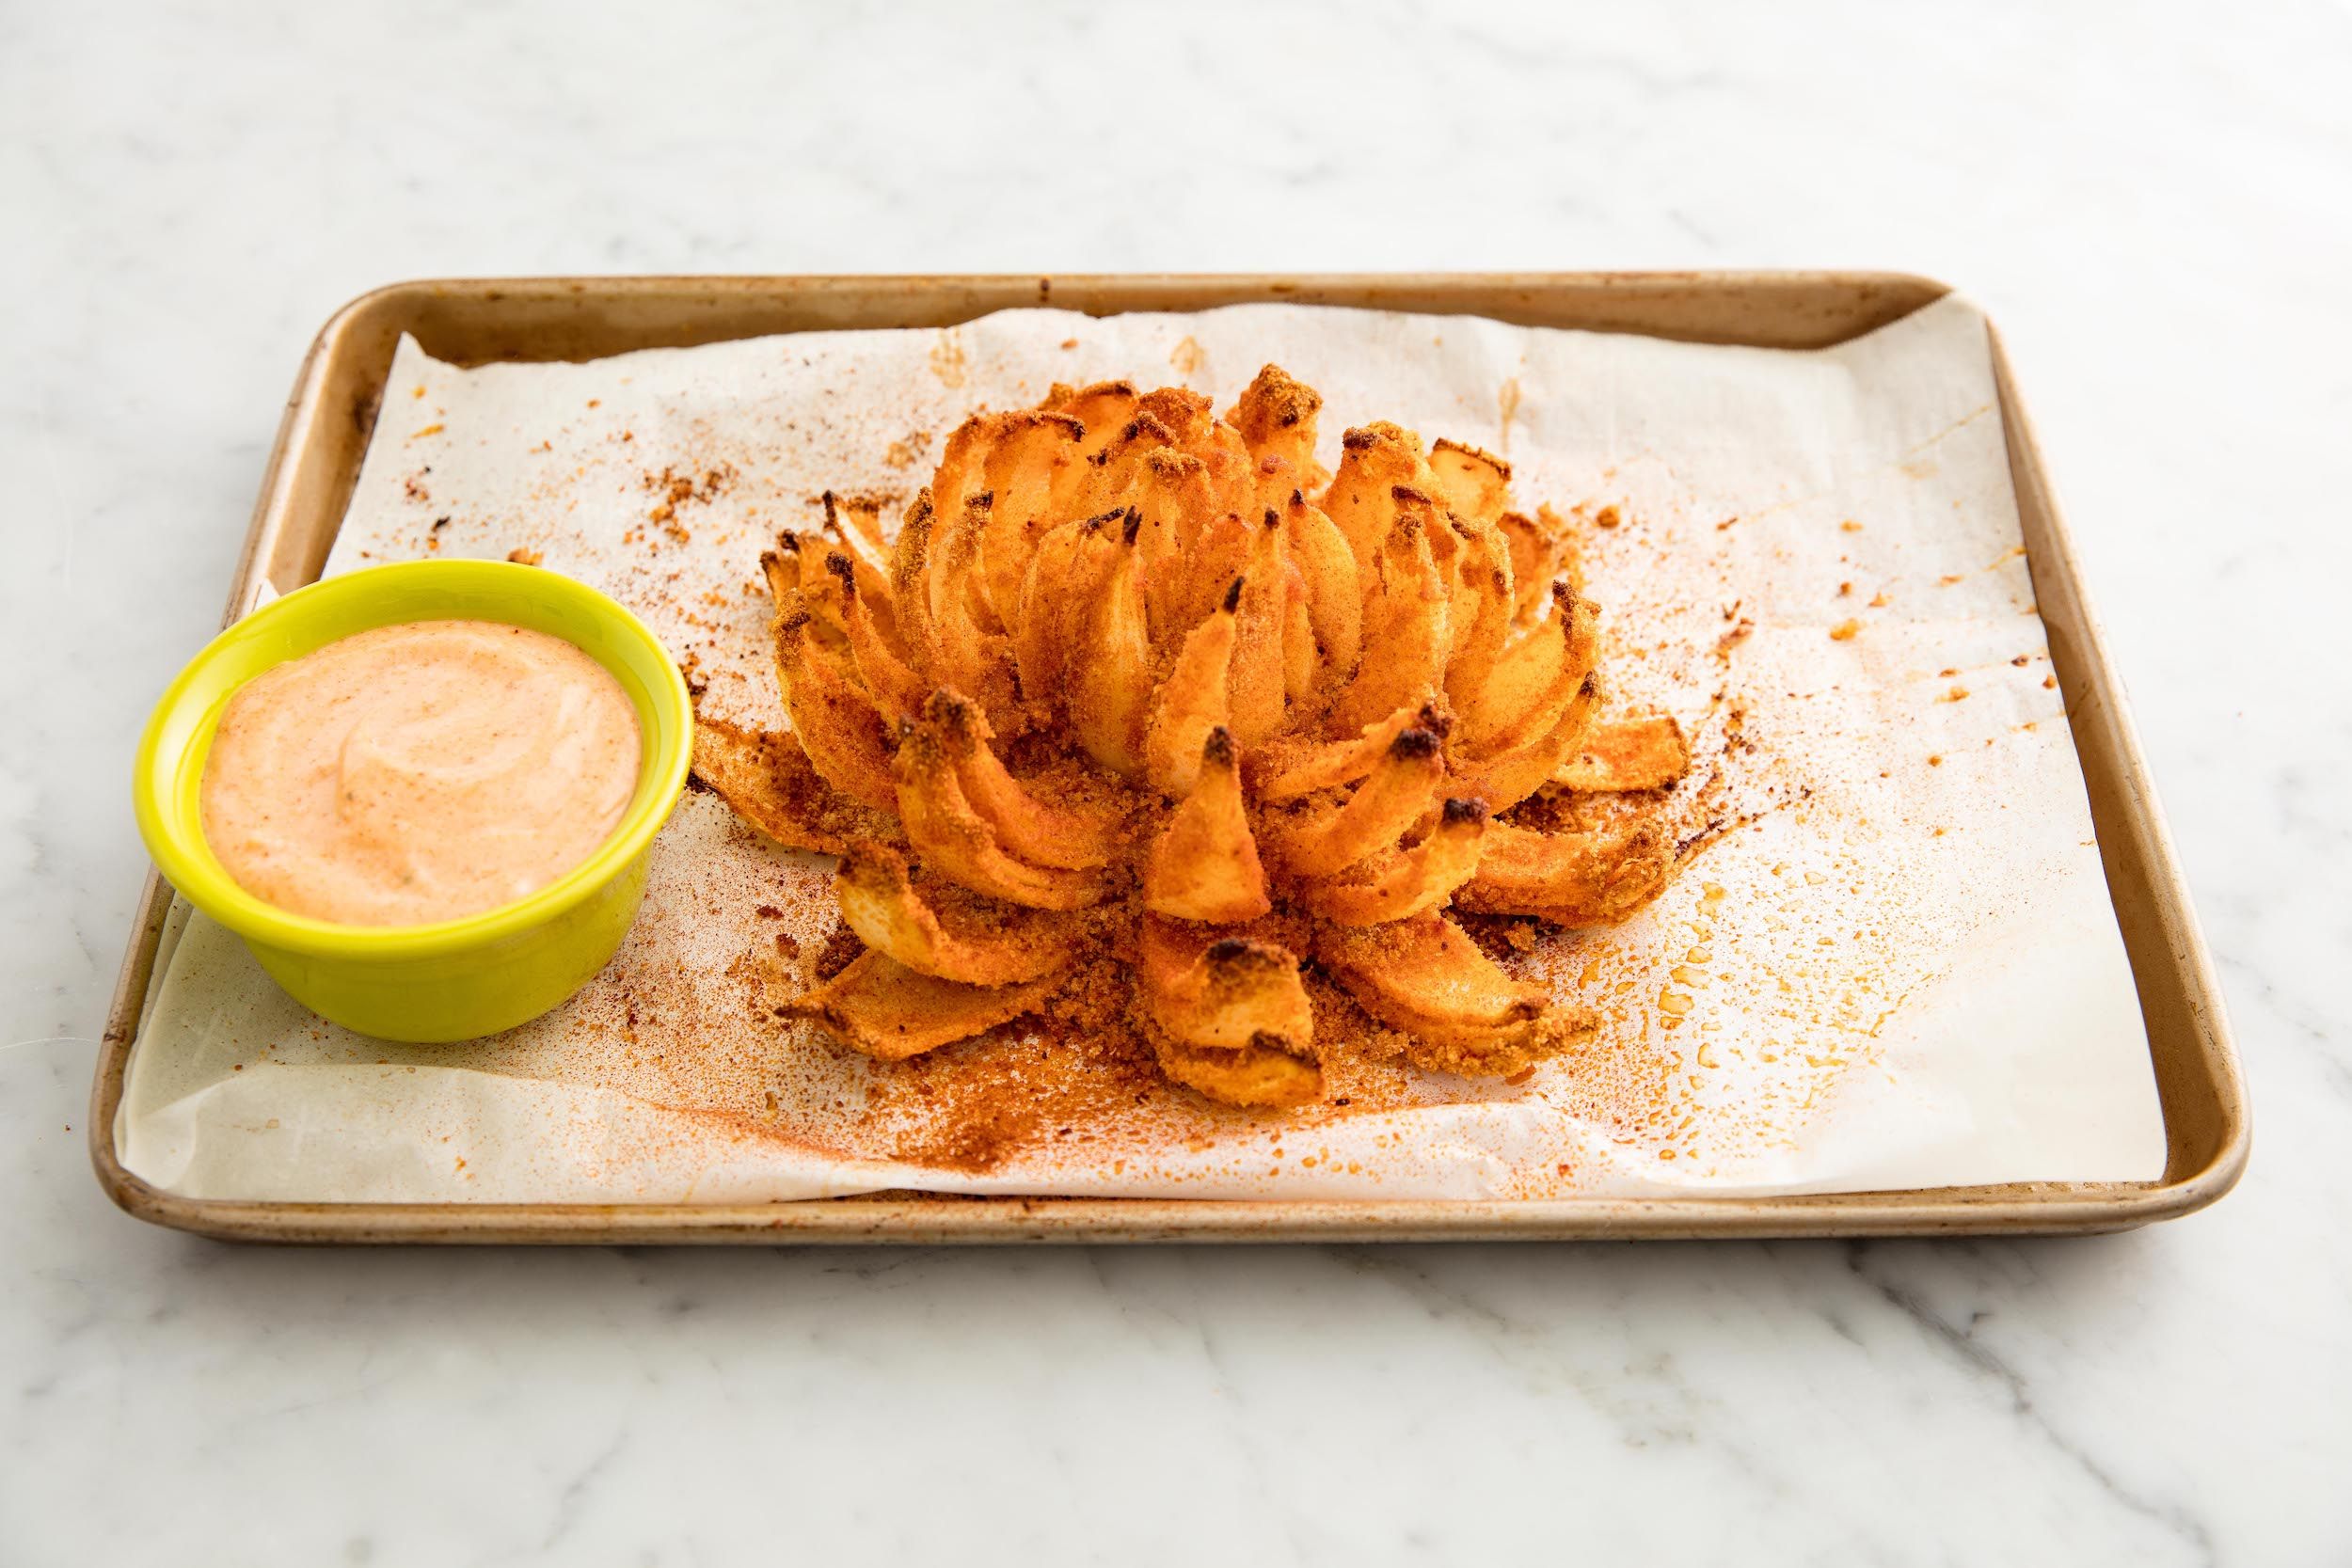 Best Baked Bloomin' Onion - How to Make a Baked Bloomin' Onion